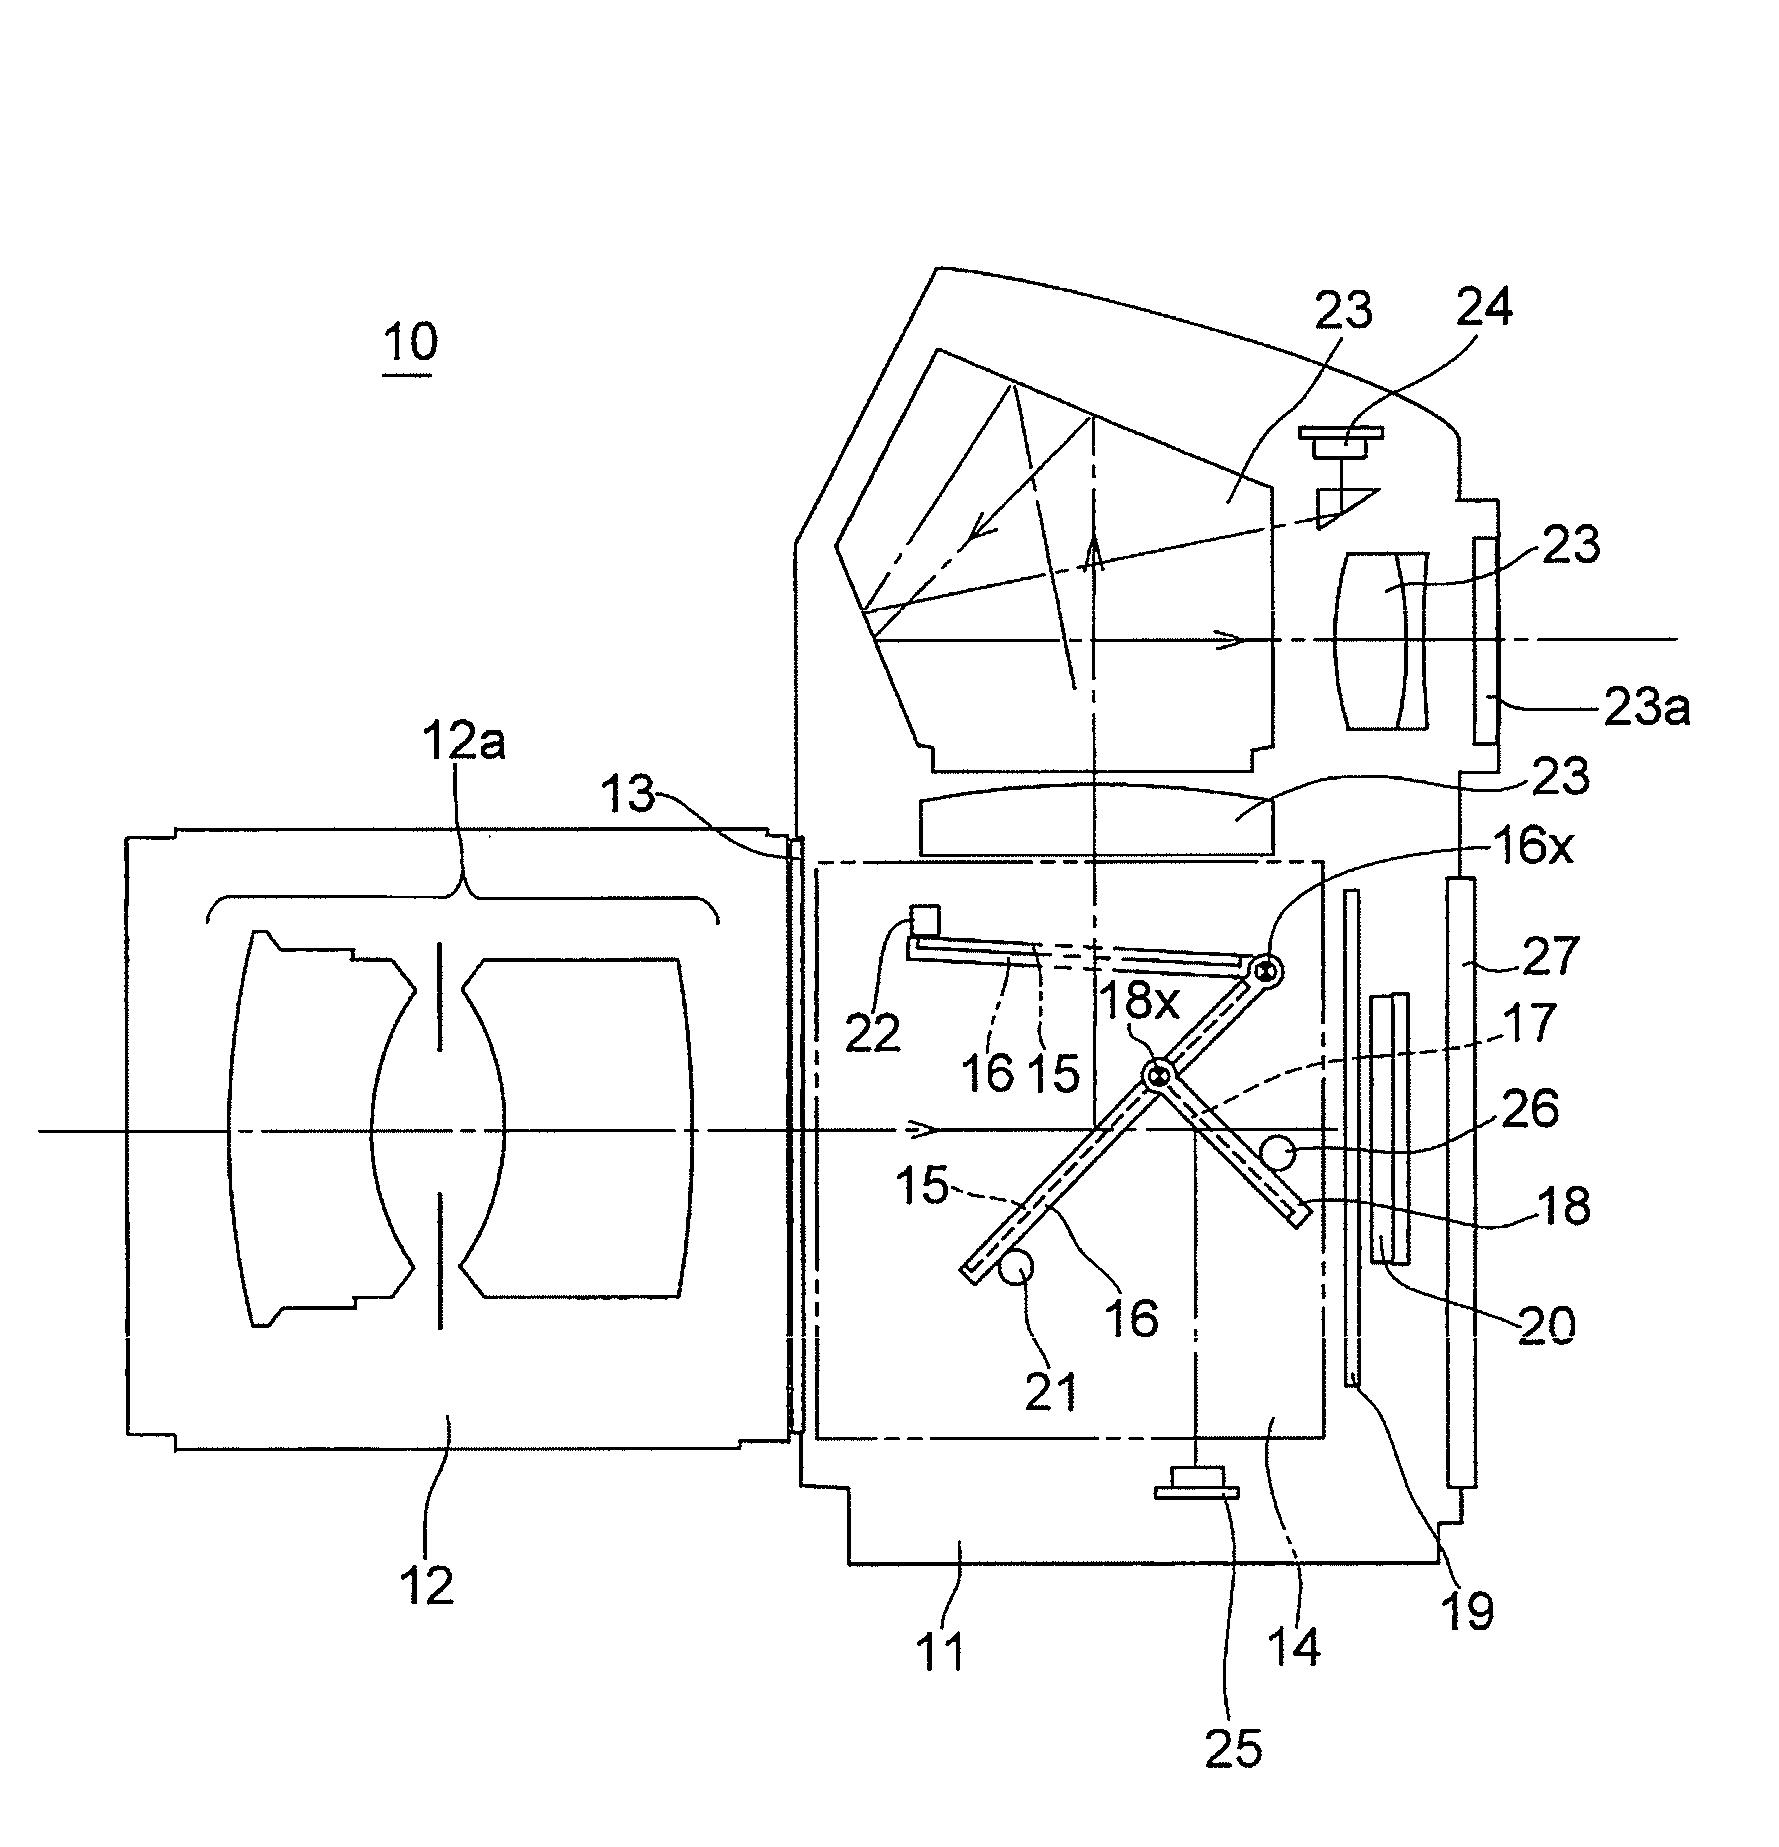 Drive mechanism for movable mirror of camera